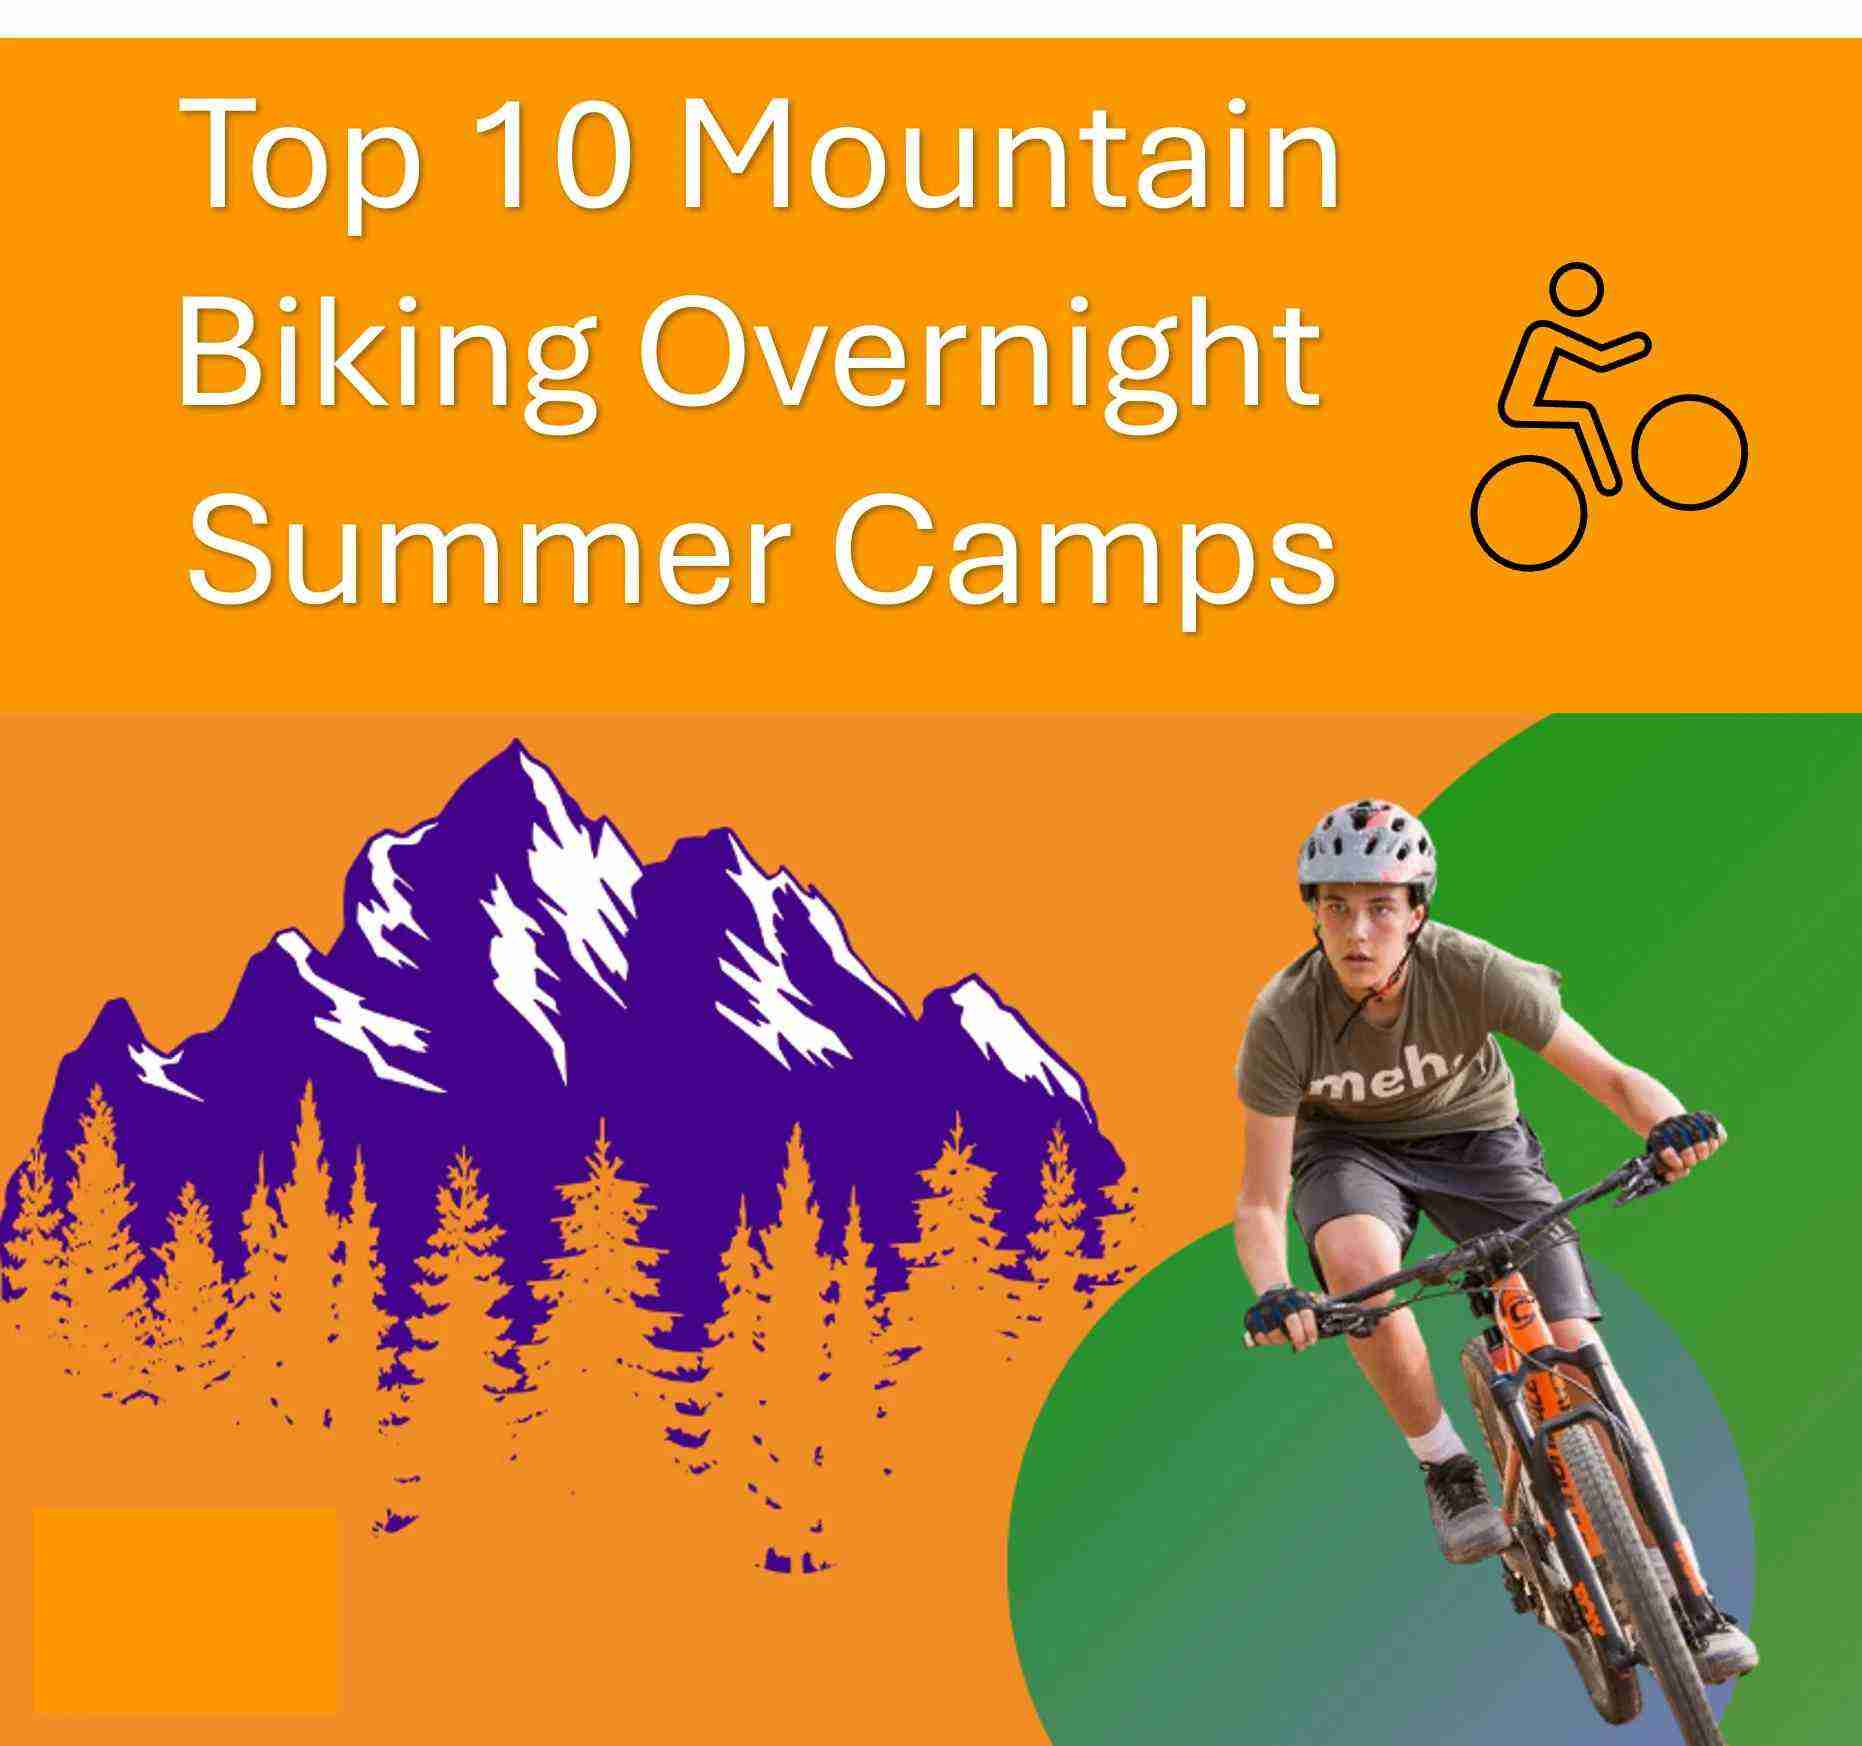 A banner about Top 10 Mountain Biking Overnight Summer Camps.